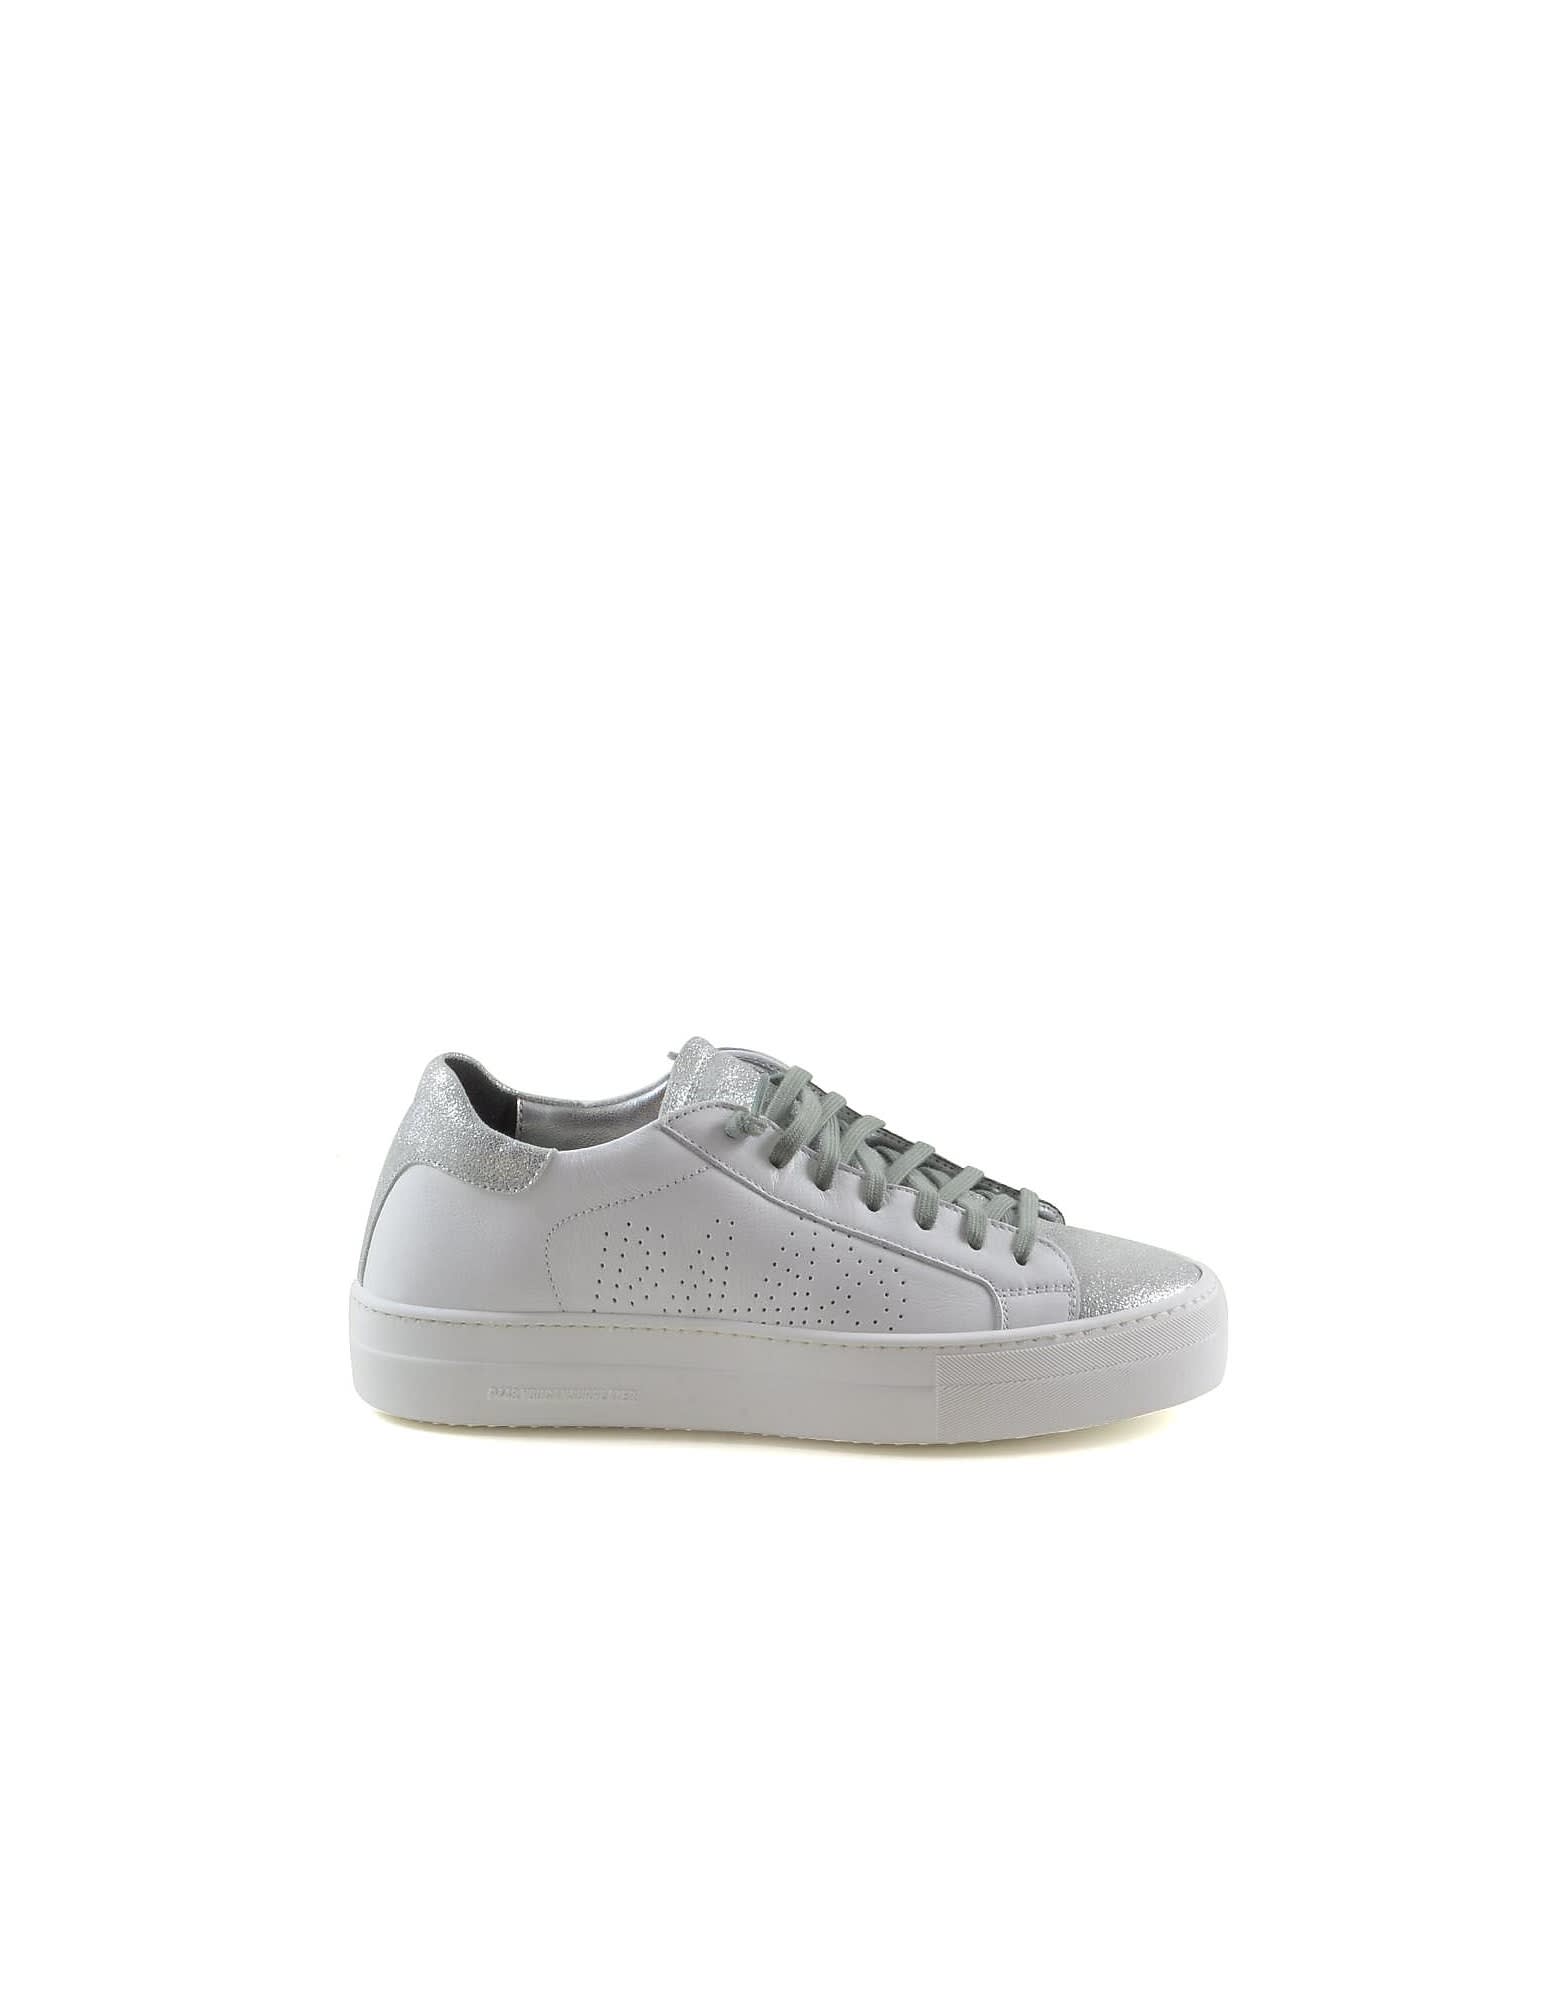 P448 White/silver Leather Womens Sneakers